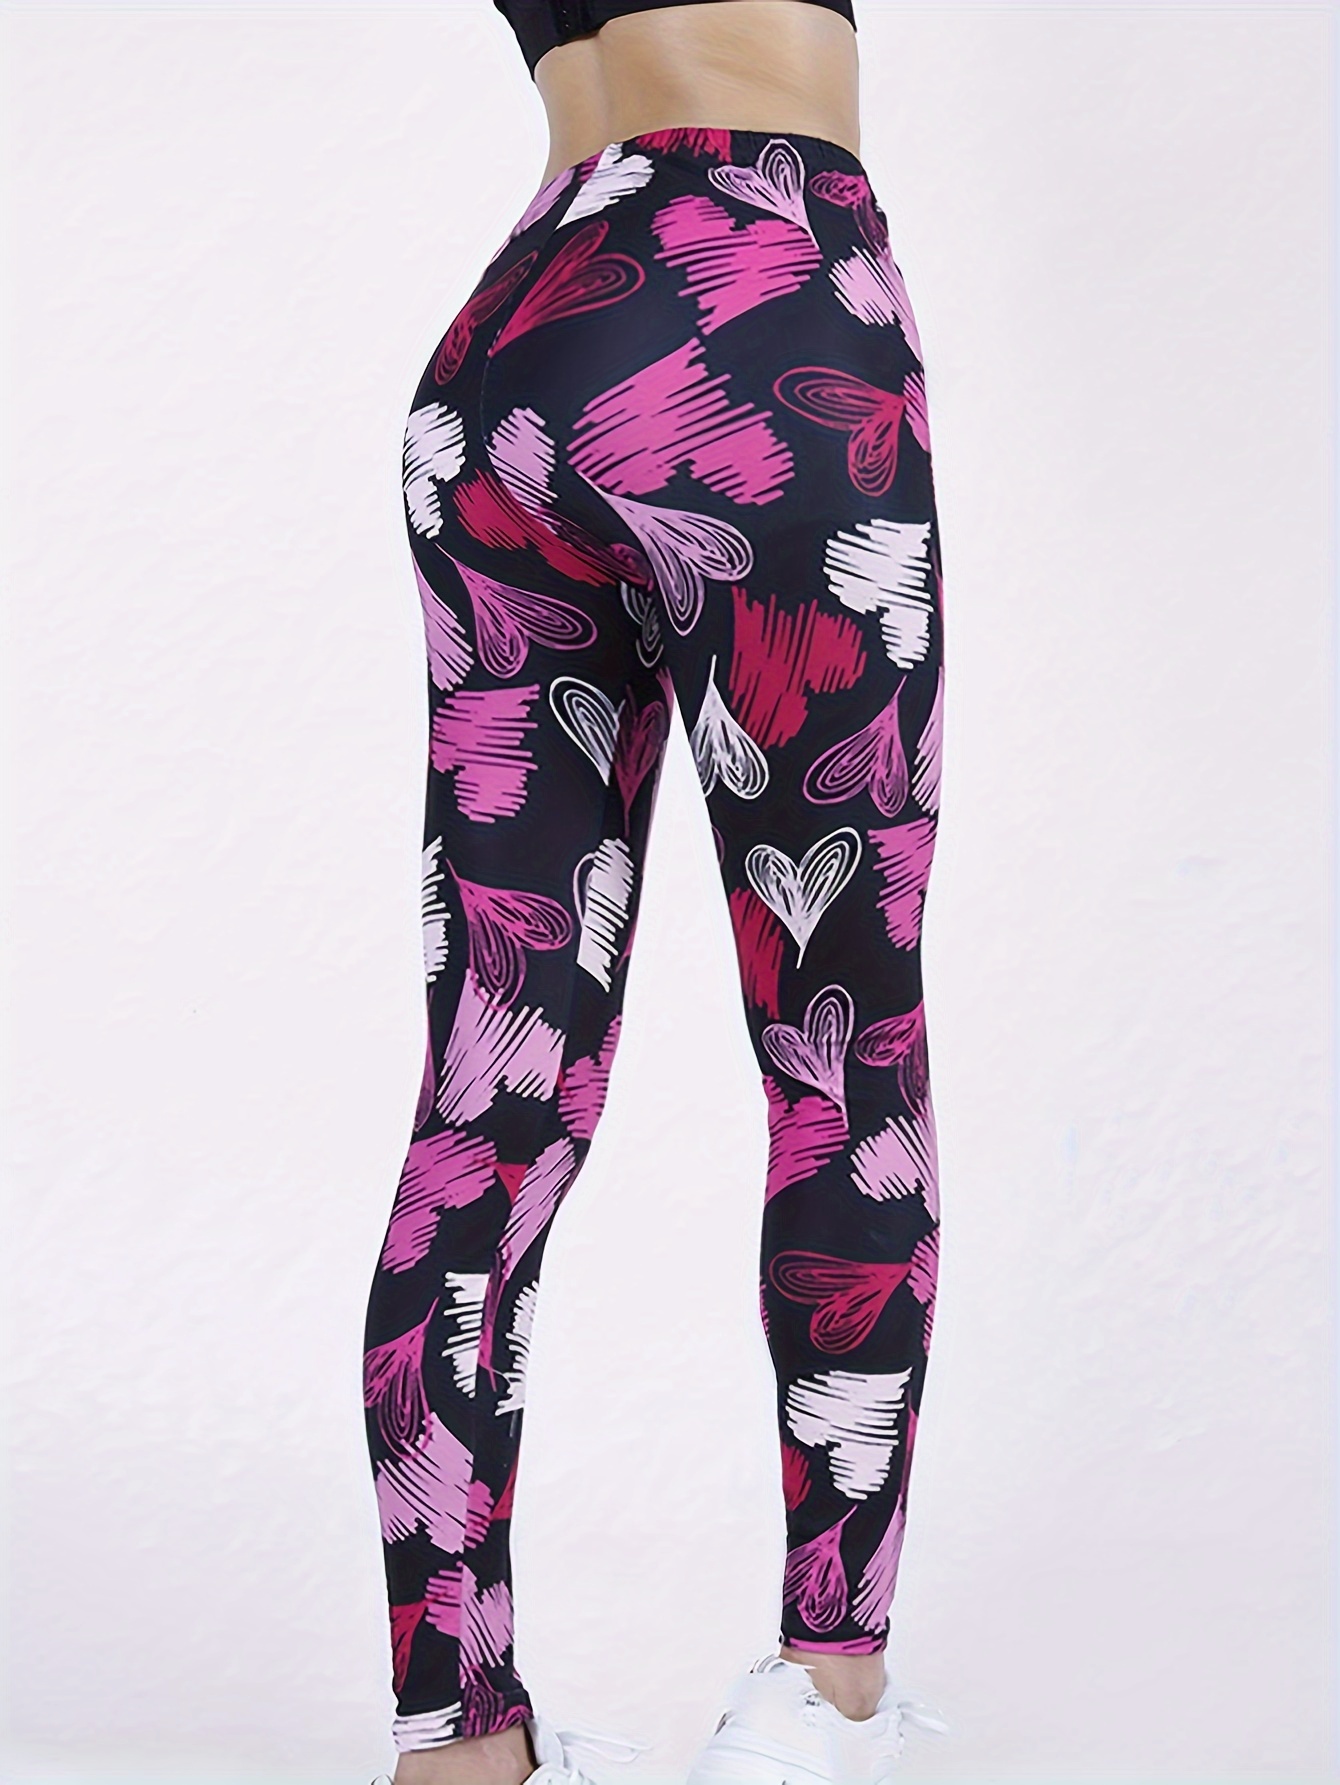 Heart & Love Print Skinny Leggings, Casual Stretchy Every Day Leggings,  Women's Clothing, Valentine's Day